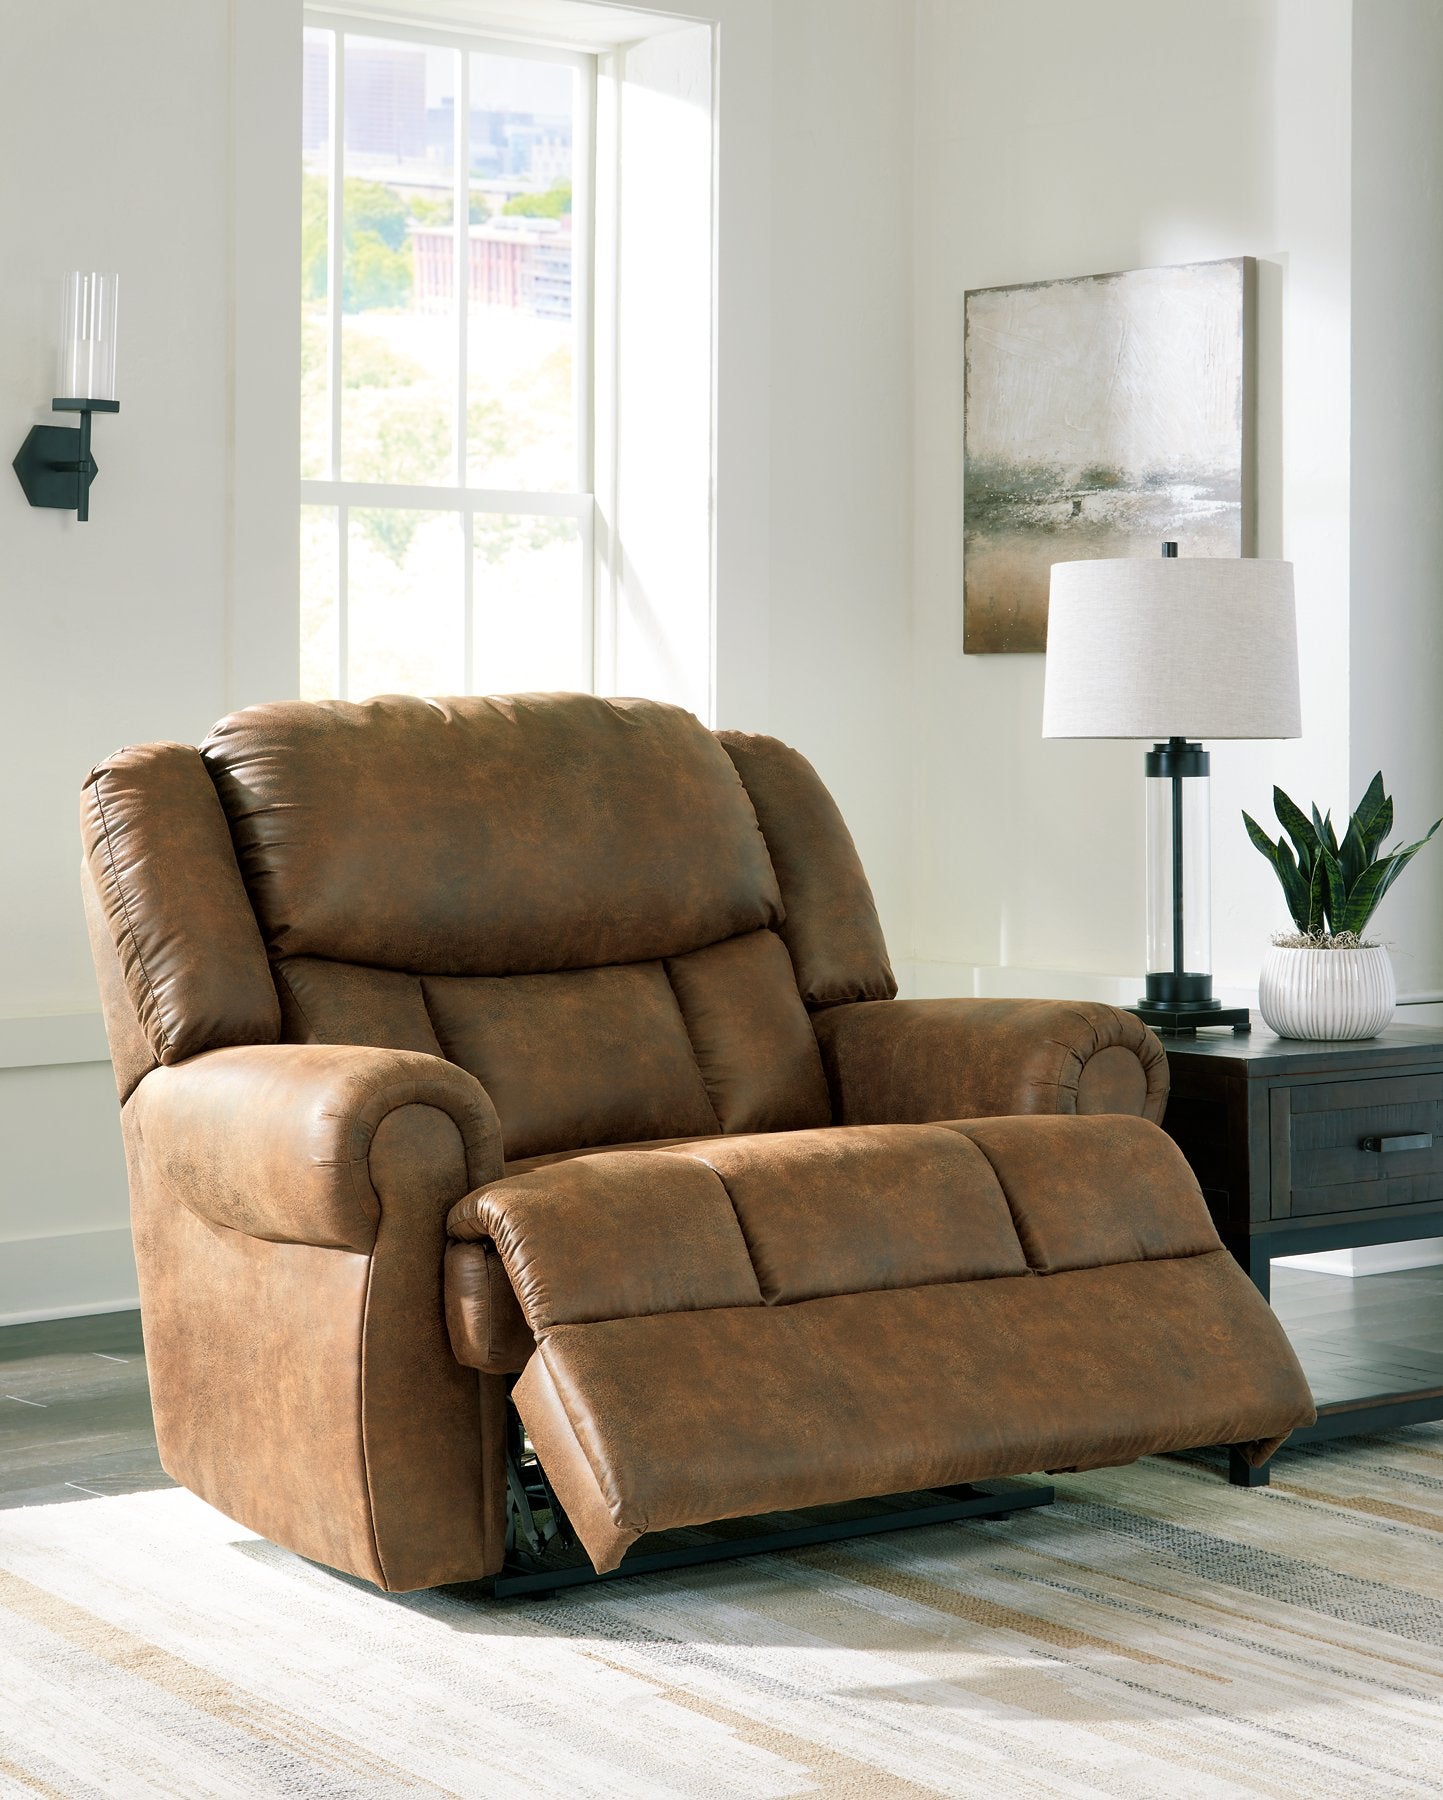 Boothbay Oversized Power Recliner - Half Price Furniture